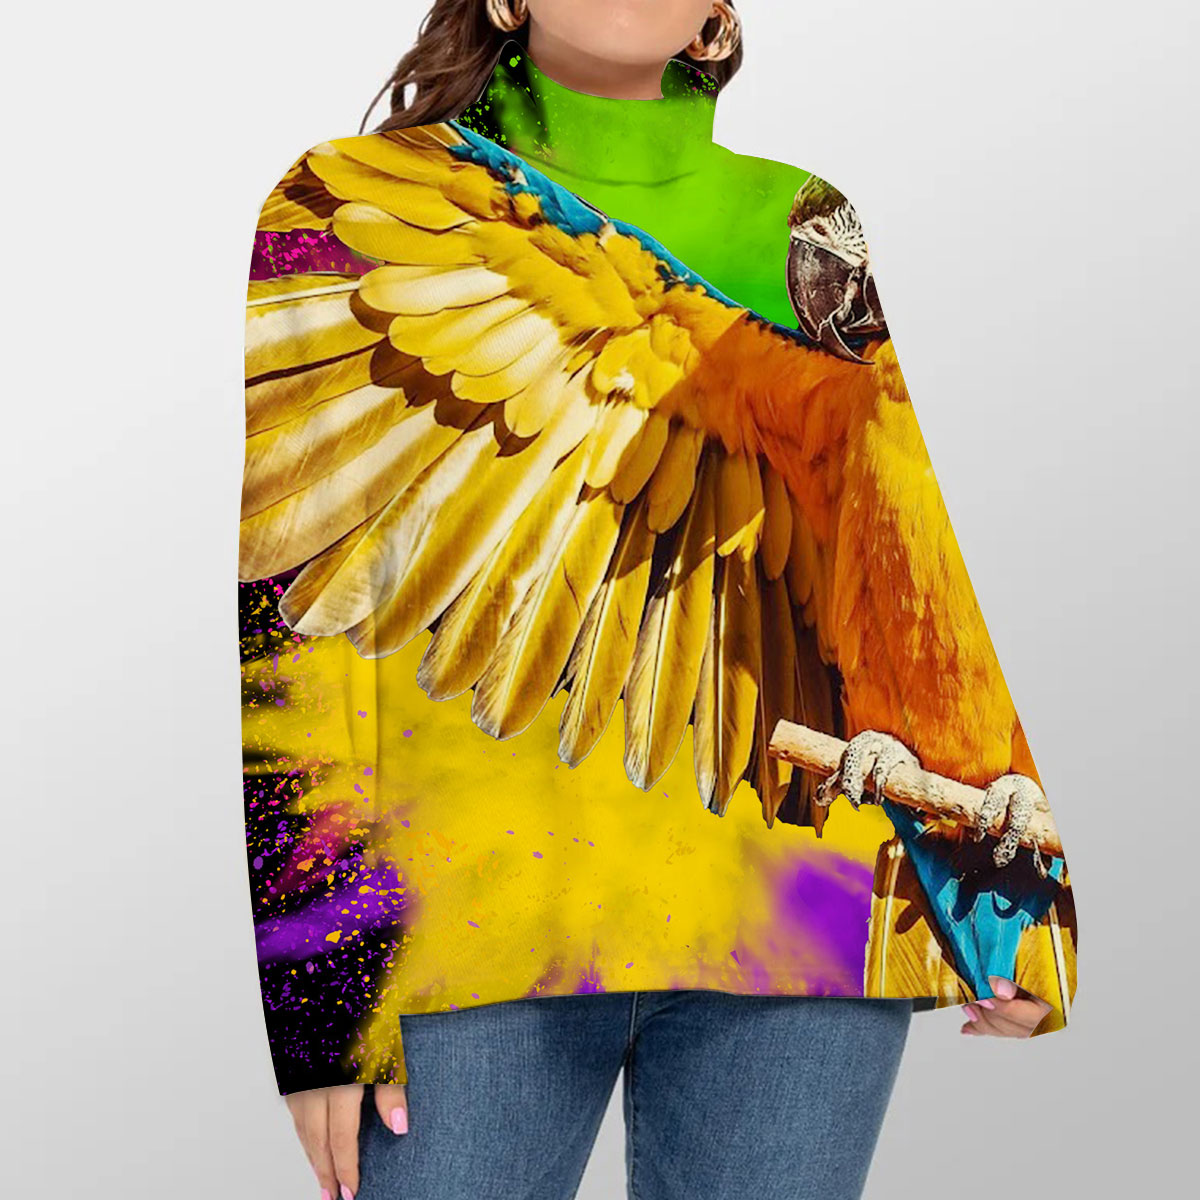 Colorful Parrot Turtleneck Sweater